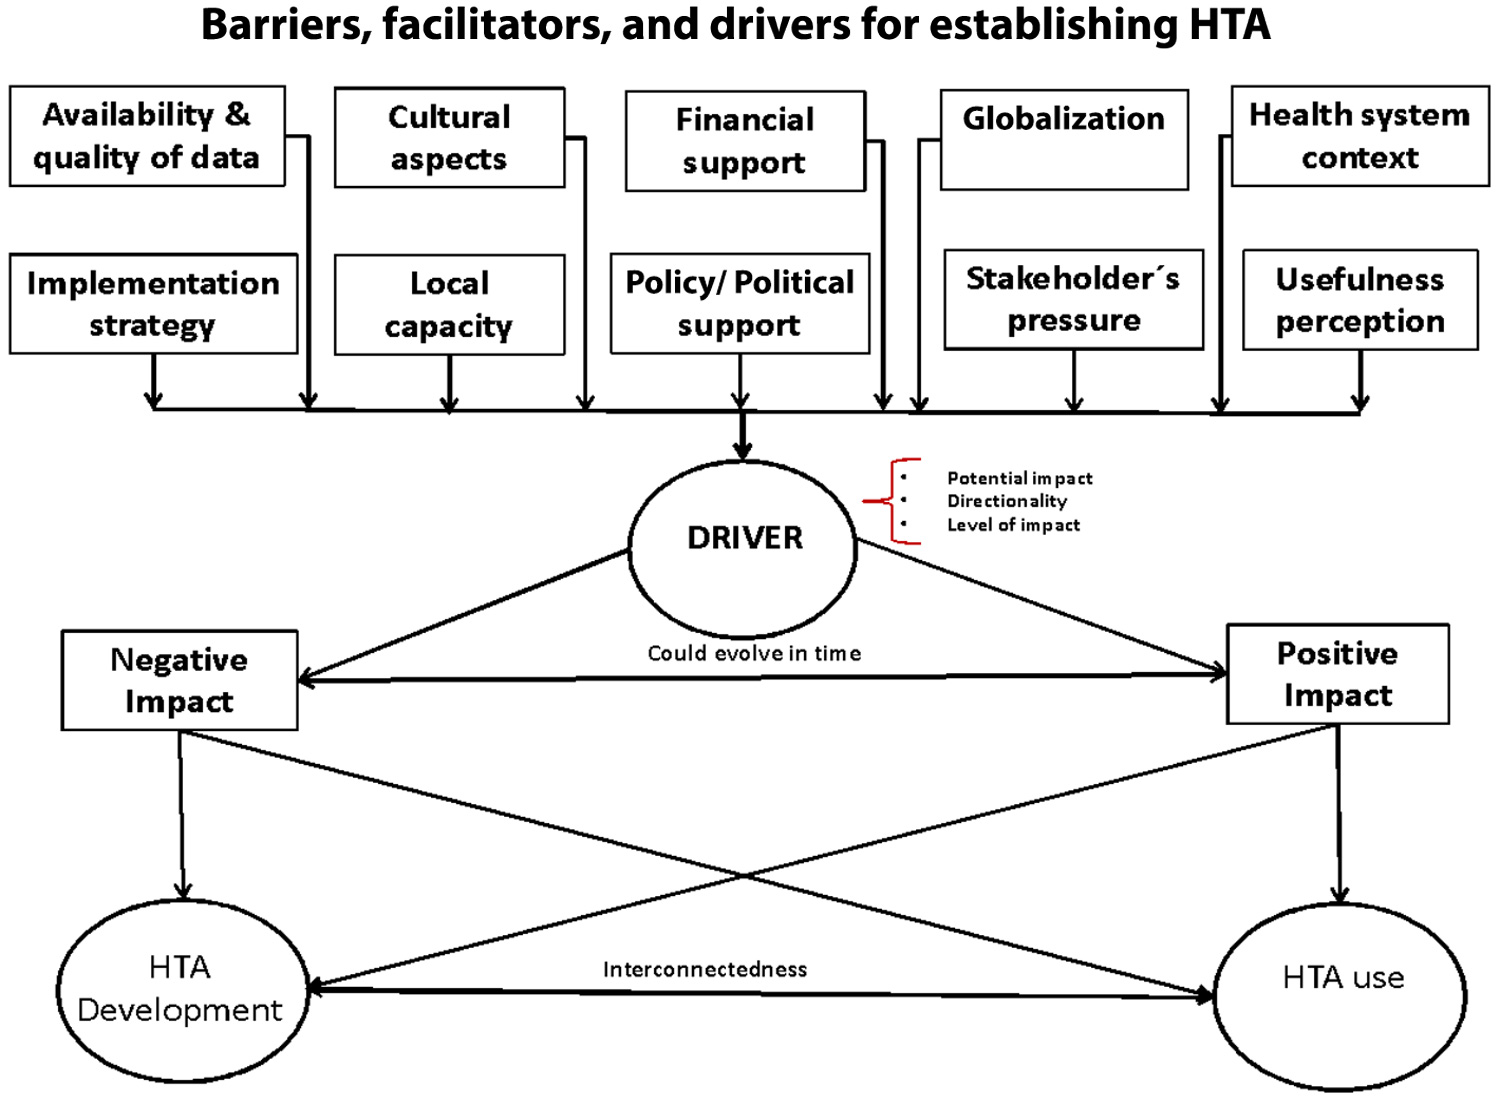 a flow chart illustrating the barriers, facilitators and drivers fro establishing HTA